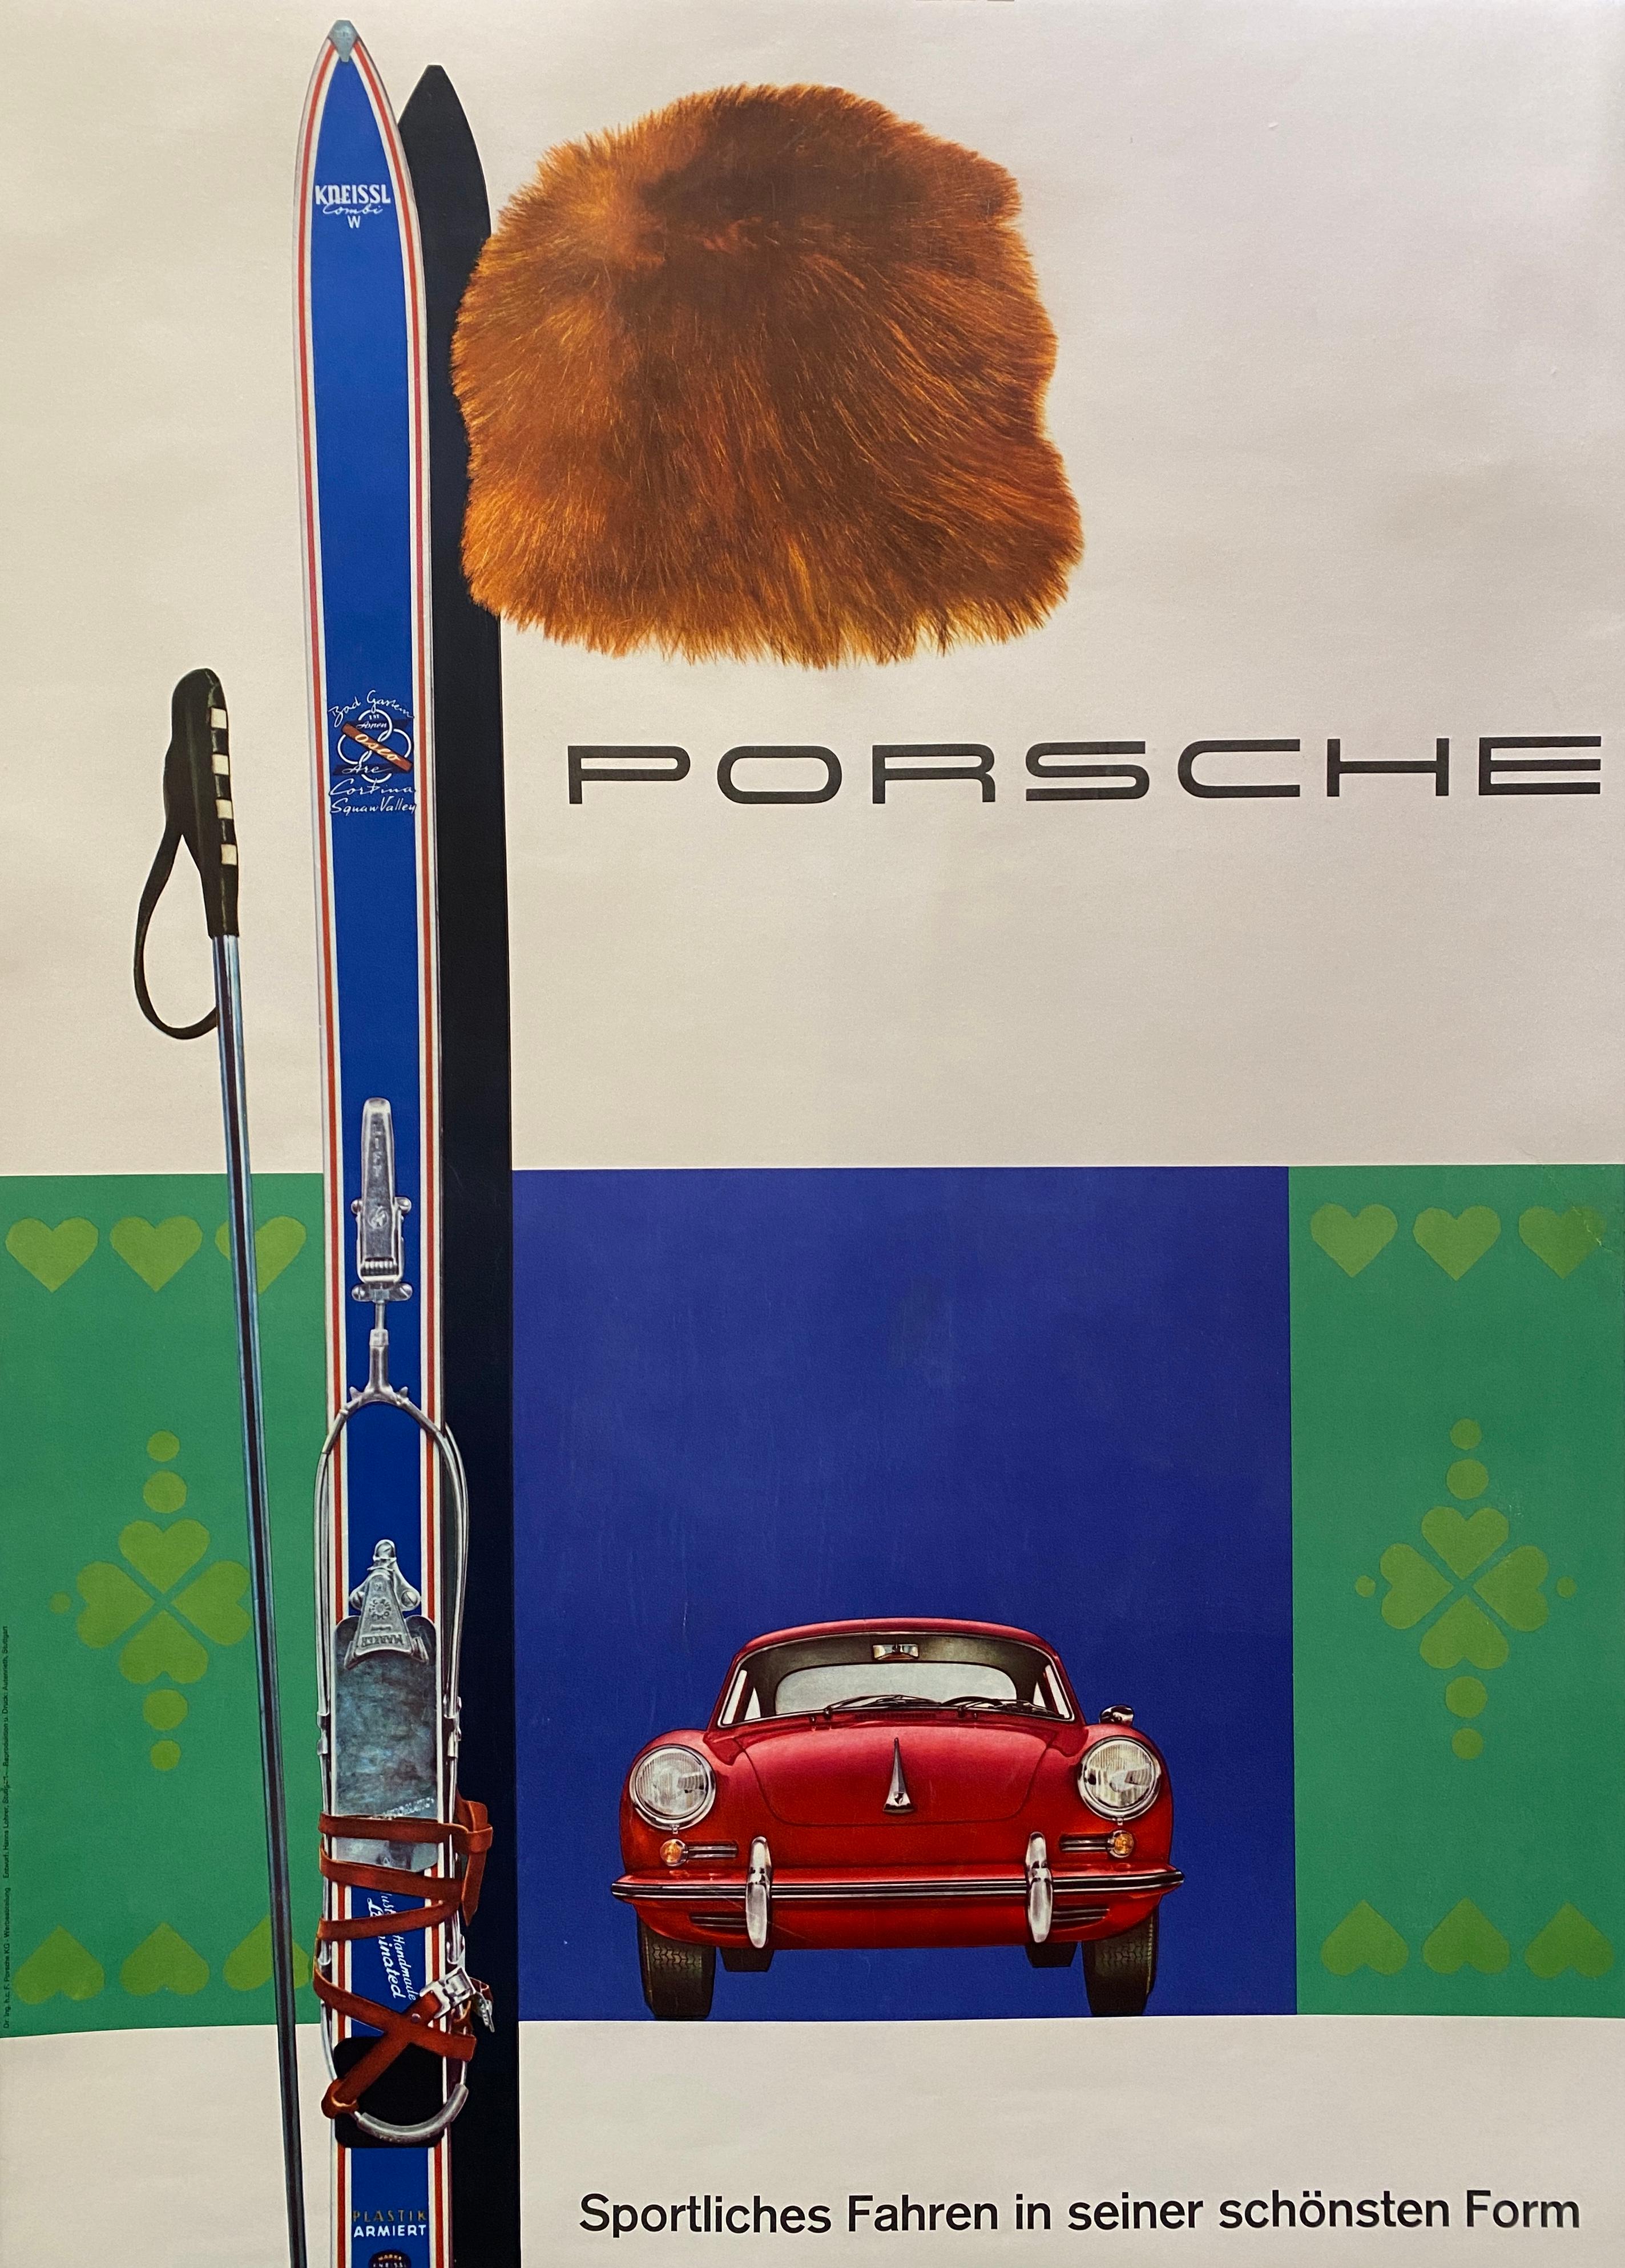 Original Vintage Advertising Poster, 'PORSCHE' BY Hanns Lohrer, 1962  

This is an original poster printed in Germany in 1962. The overall condition is very good.

ARTIST	
Hanns Lohrer

YEAR	
1962

DIMENSIONS	
118.7 x 84